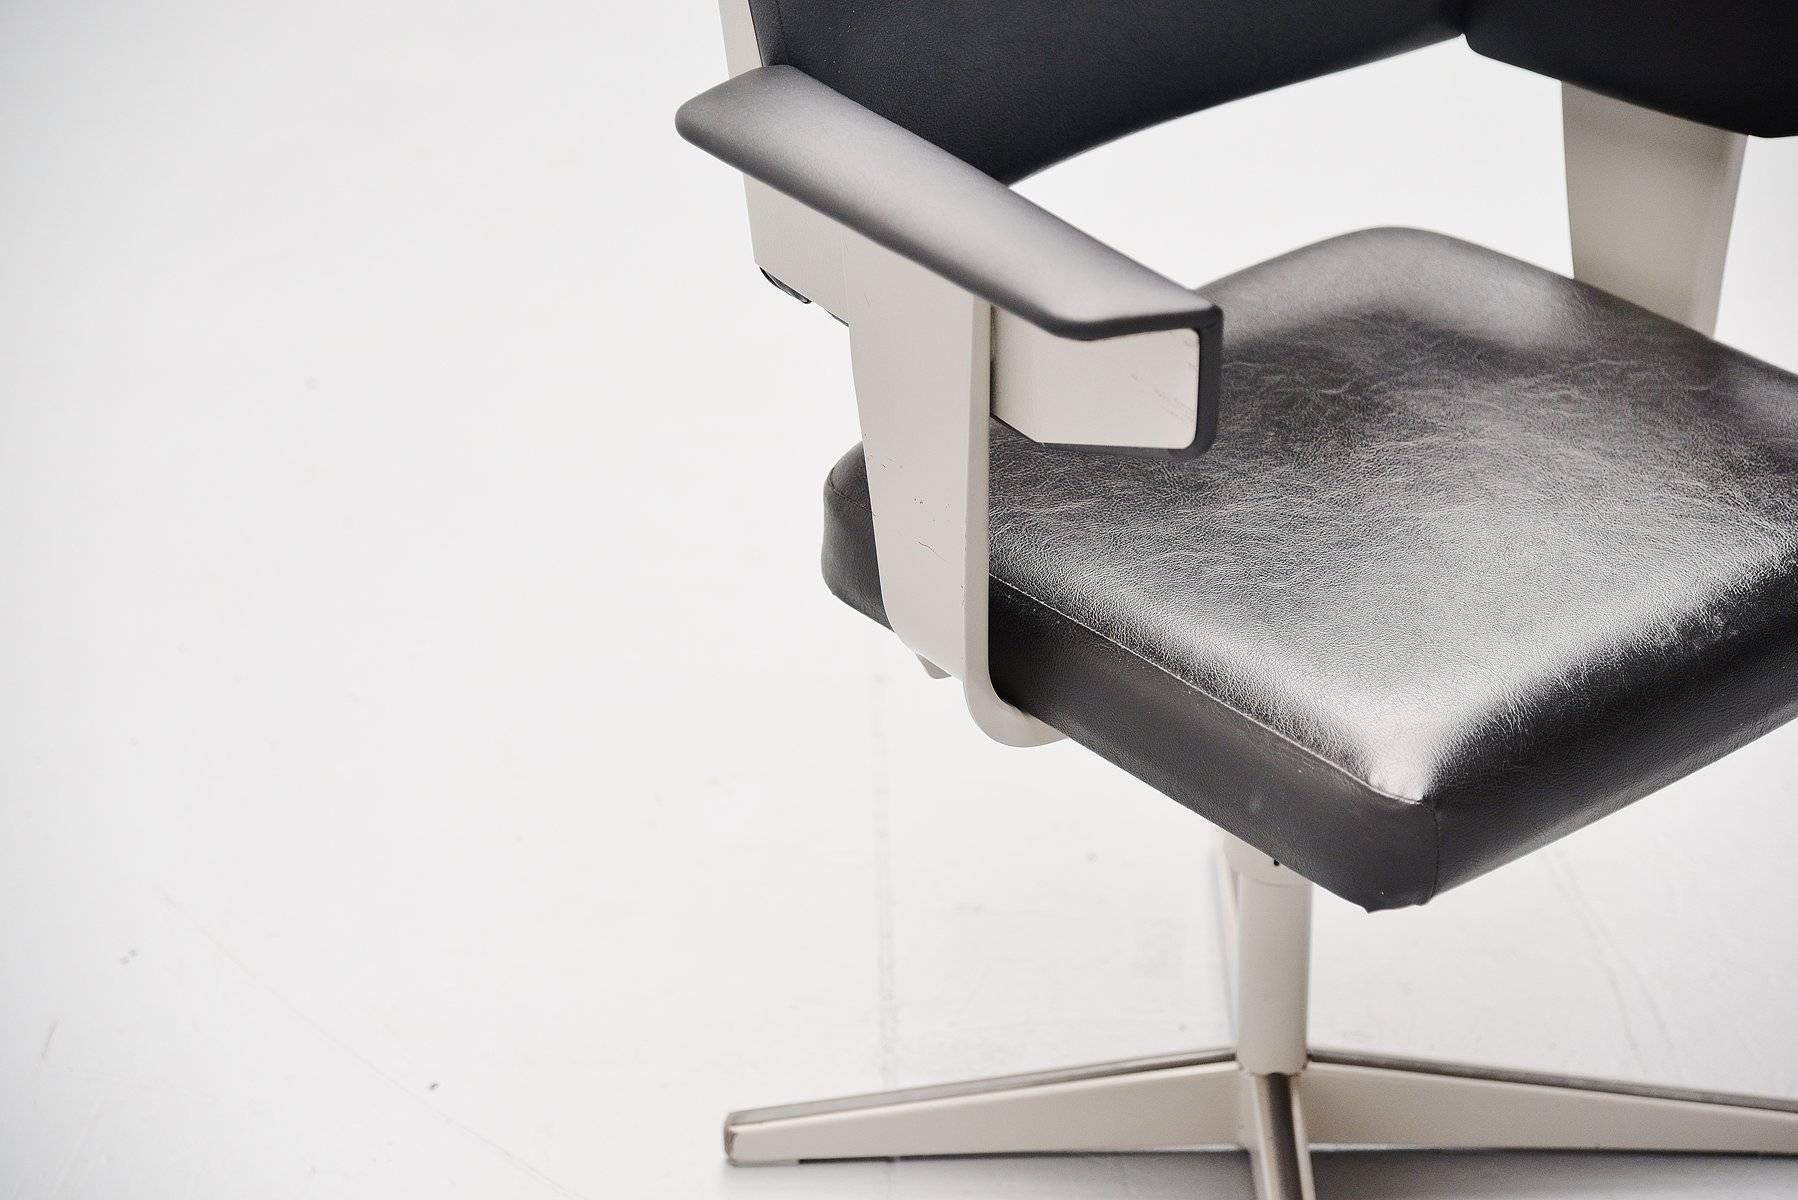 Very nice original grey lacquered desk chair designed by Friso Kramer for Ahrend de Cirkel, Holland, 1960. This chair has a grey lacquered metal frame and original black vinyl upholstery in excellent condition, we redid the arm rests and we renewed